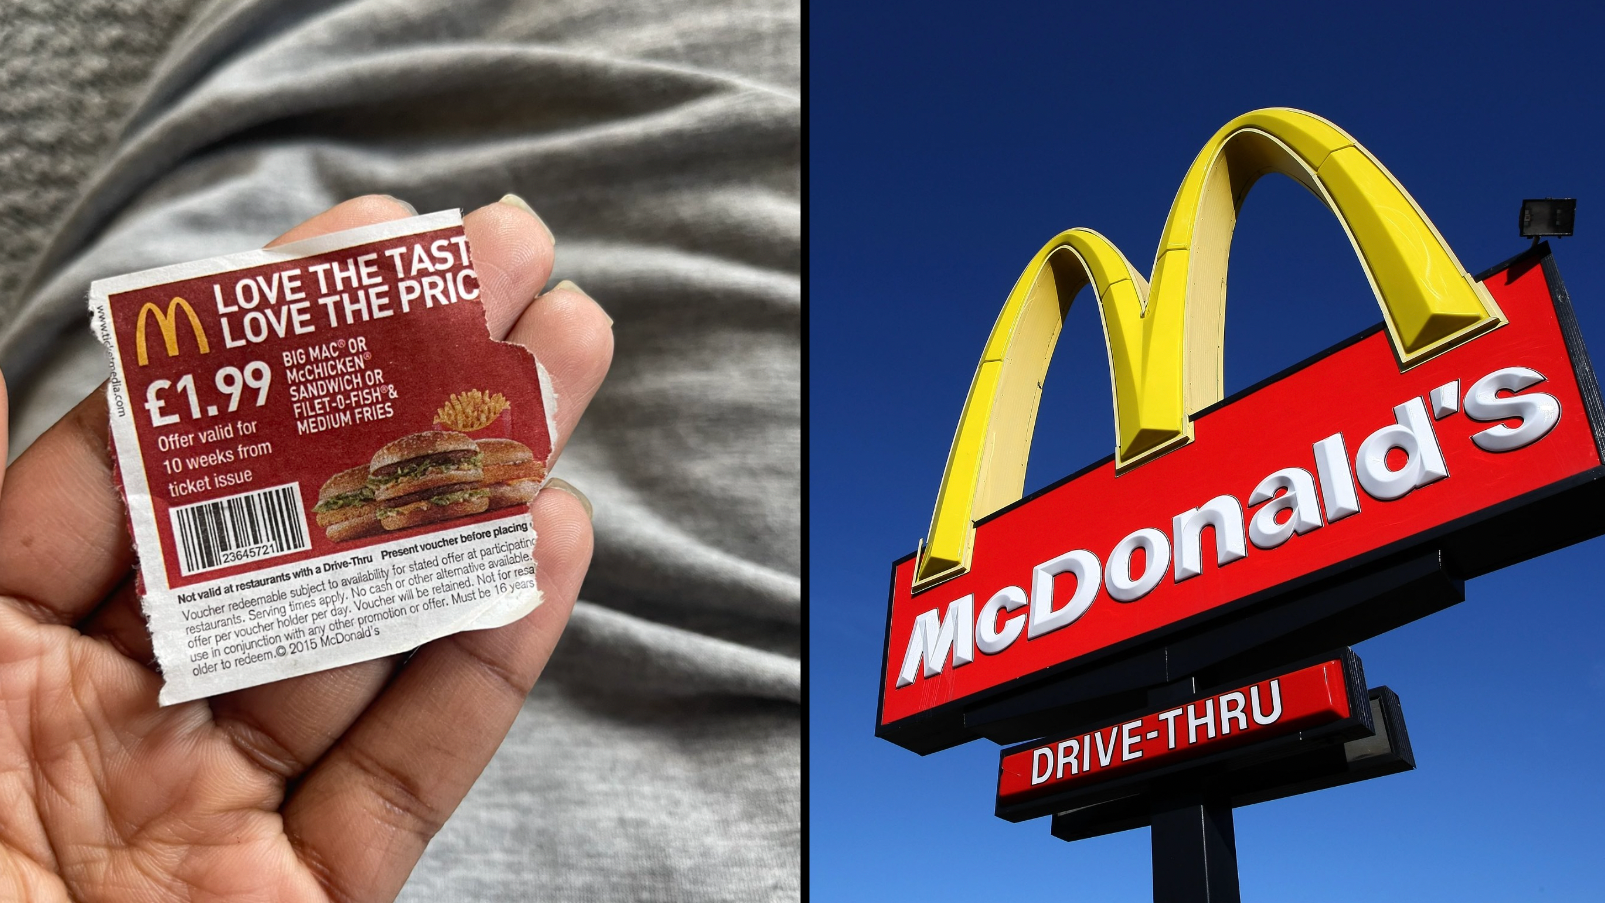 McDonald's is selling its most popular items for 99p for limited